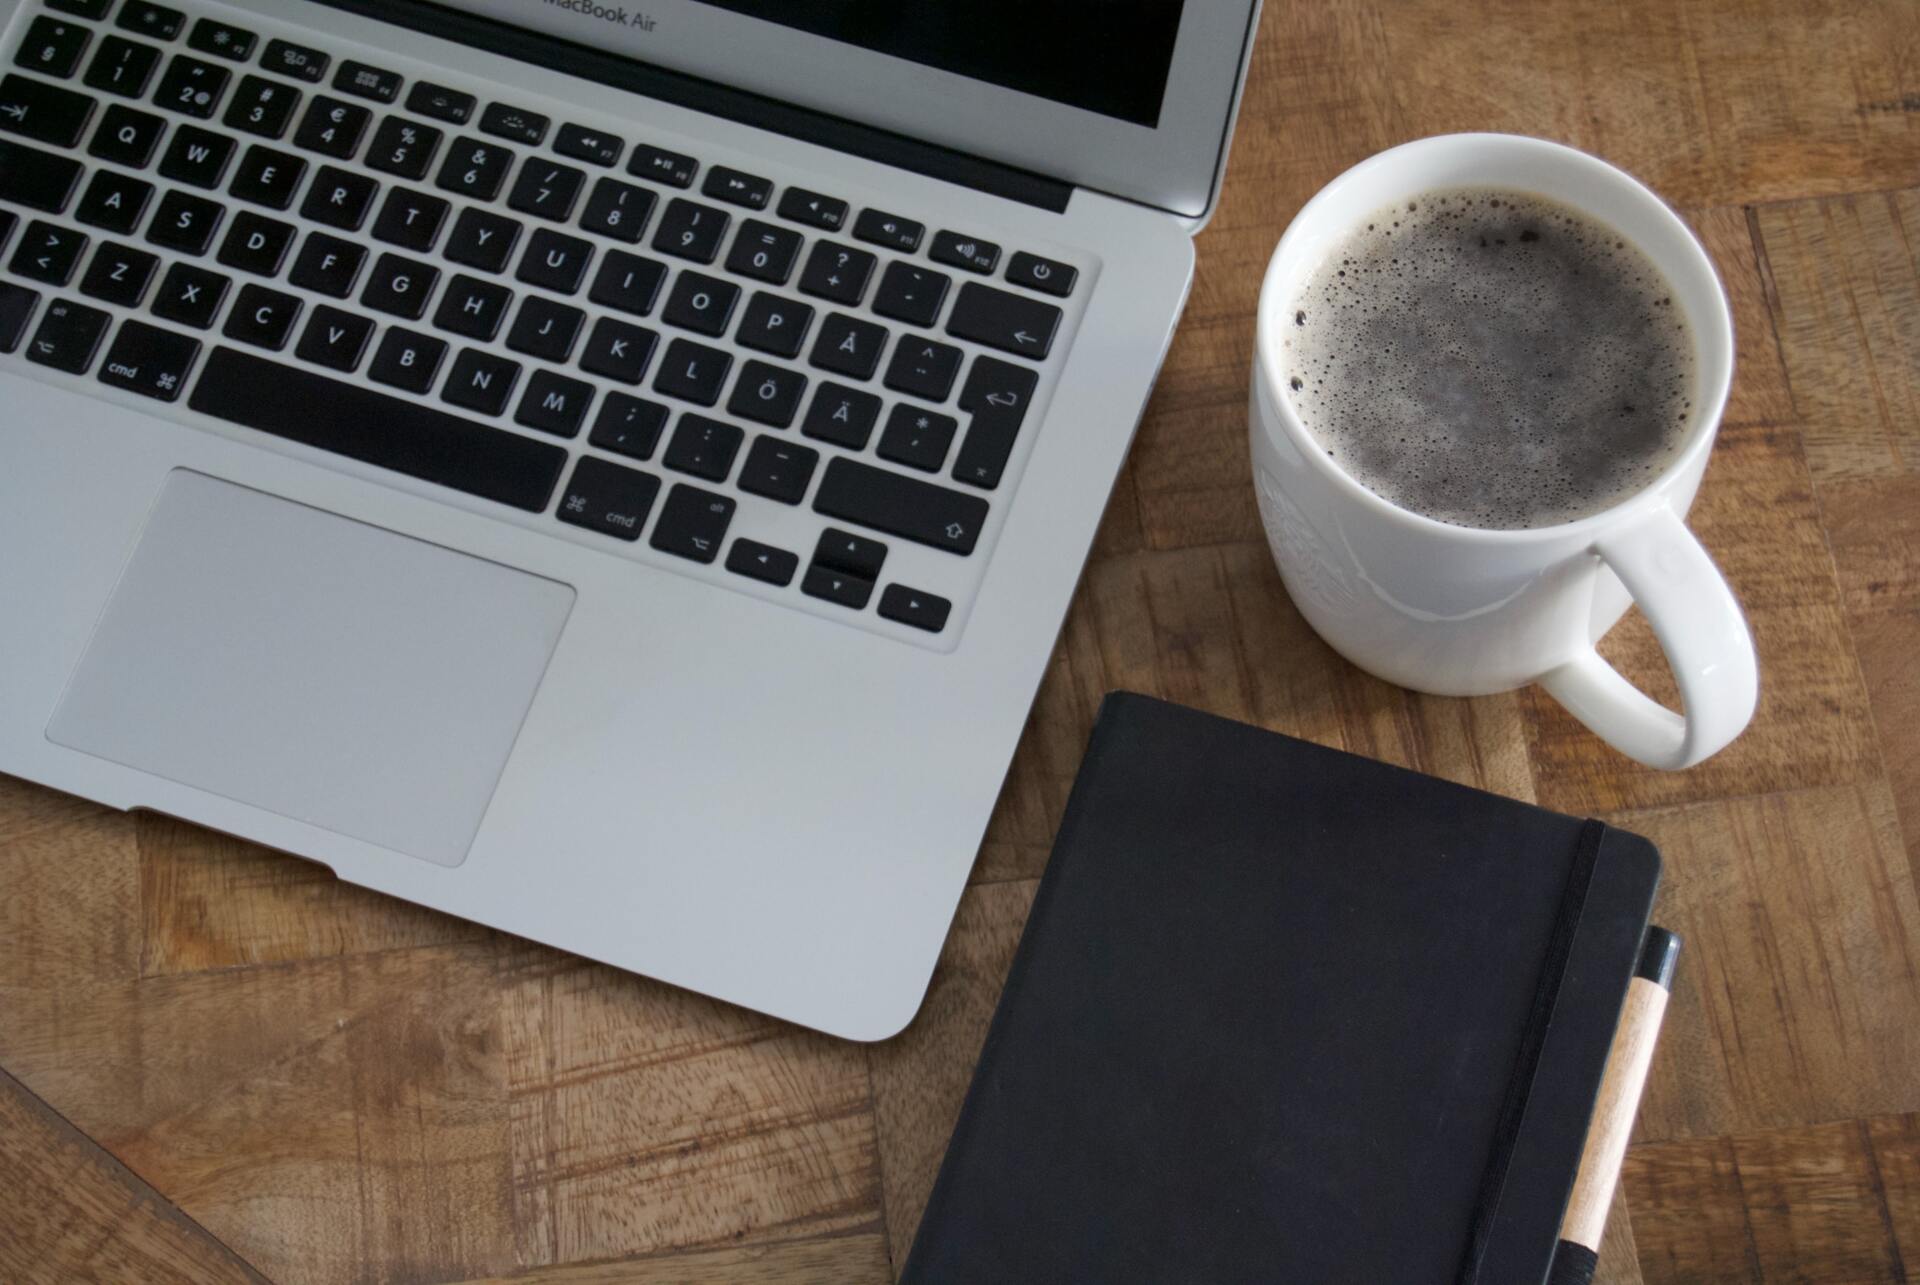 An image with an open laptop, close black notebook with pen, and a cup of black coffee in a white mu